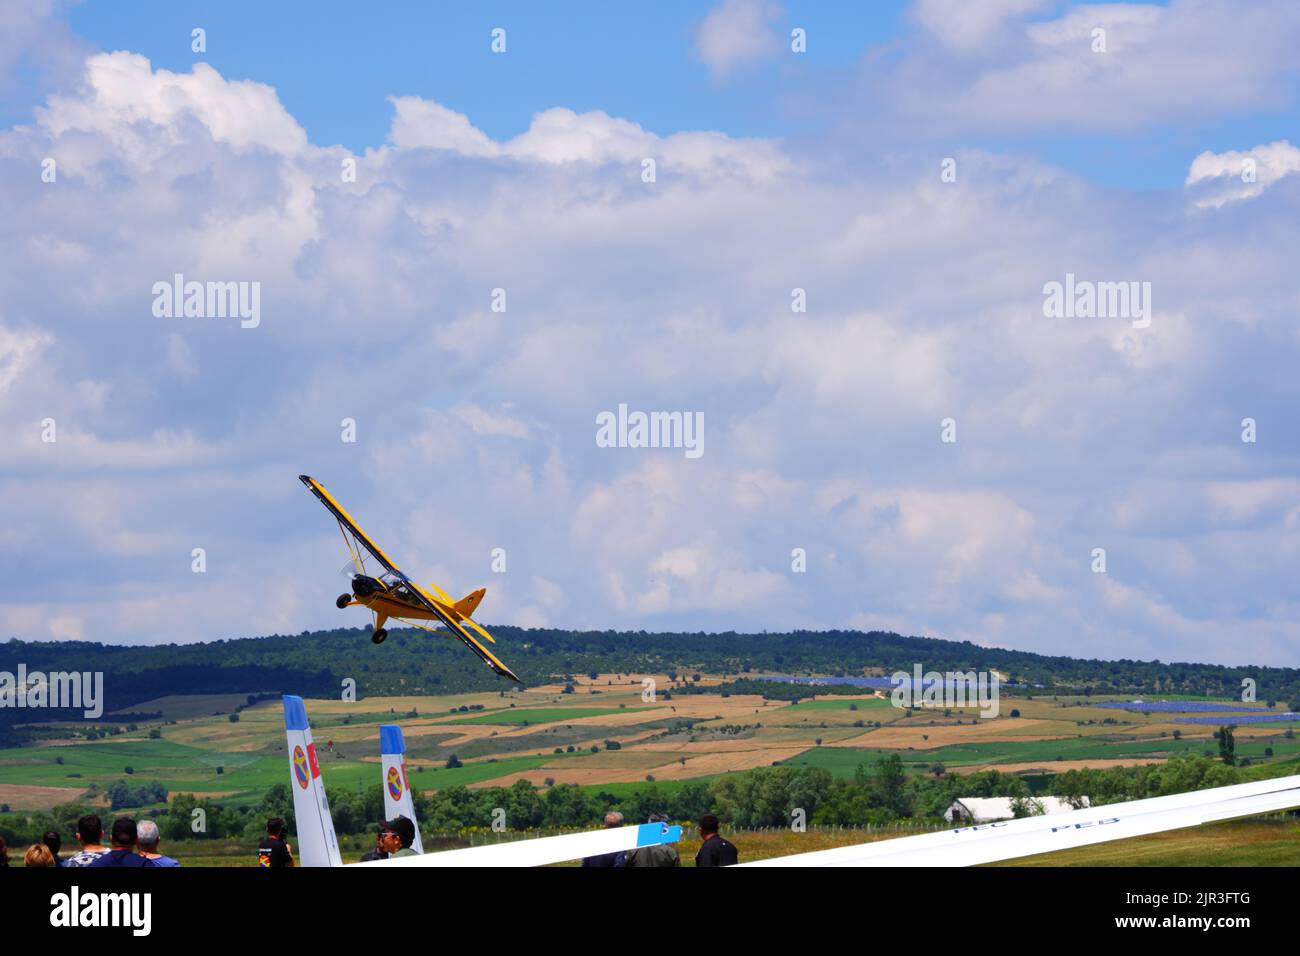 Single engine yellow air plane flying at low altitude close to the ground Stock Photo